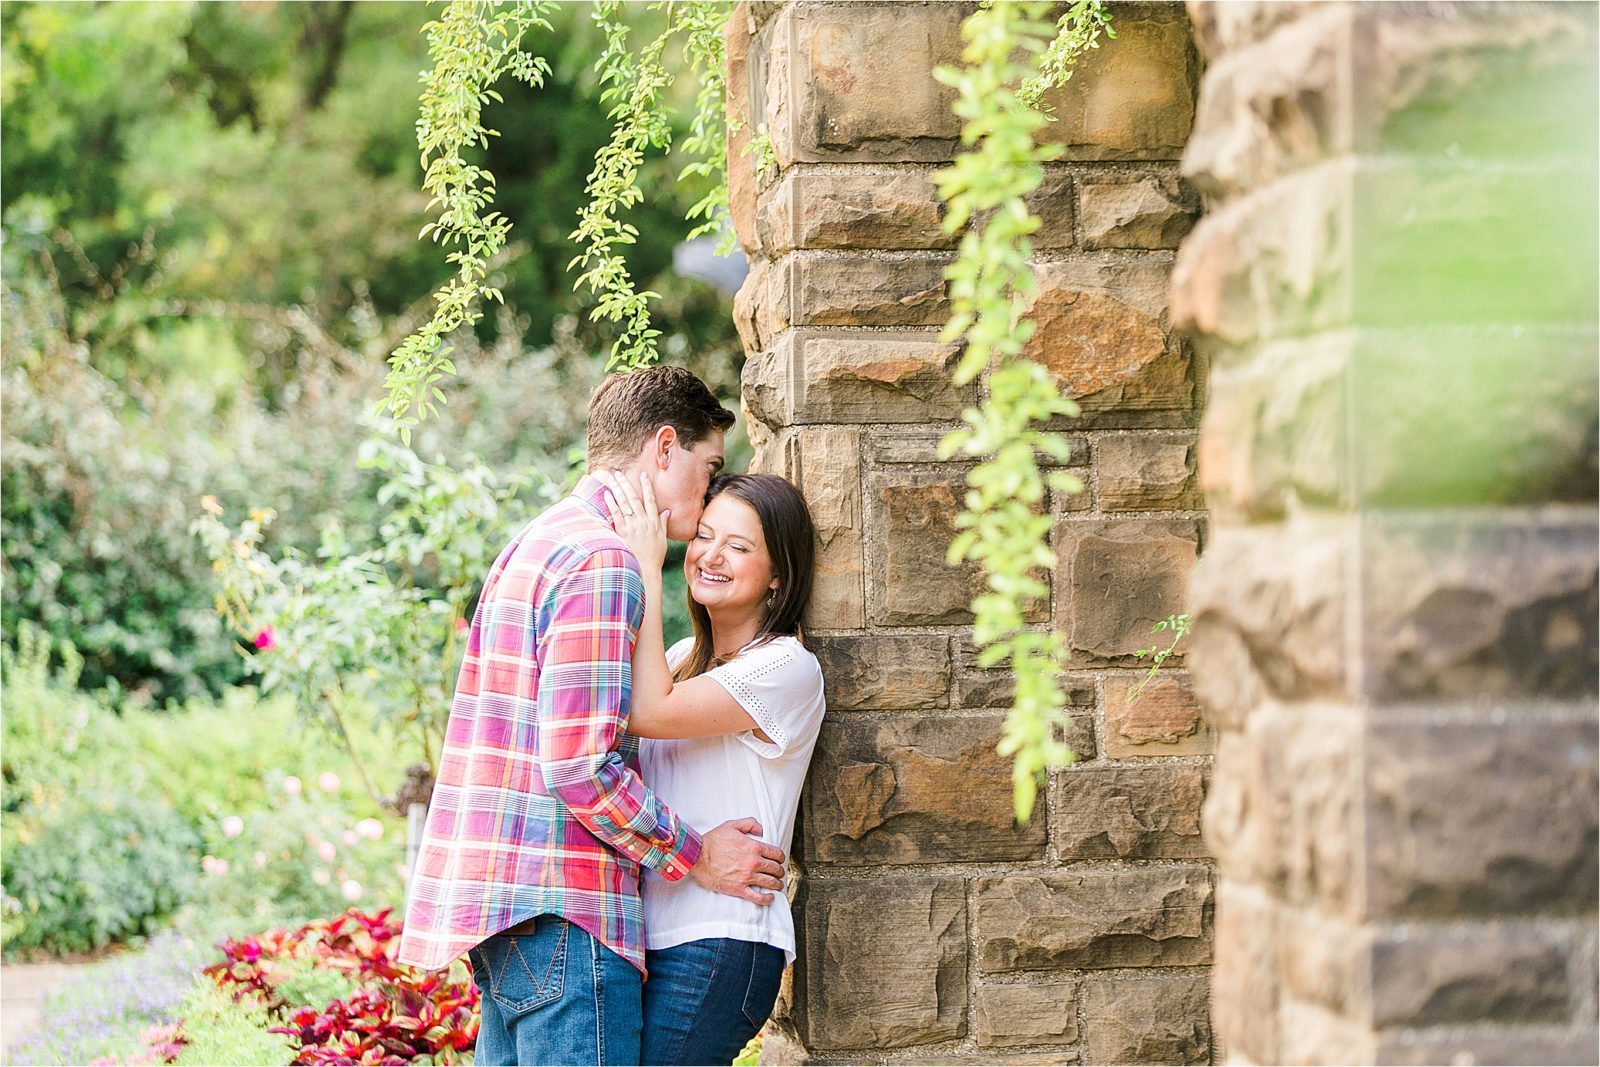 A copule giving Forehead kisses during their dfw engagement session at The Fort worth Botanic Gardens